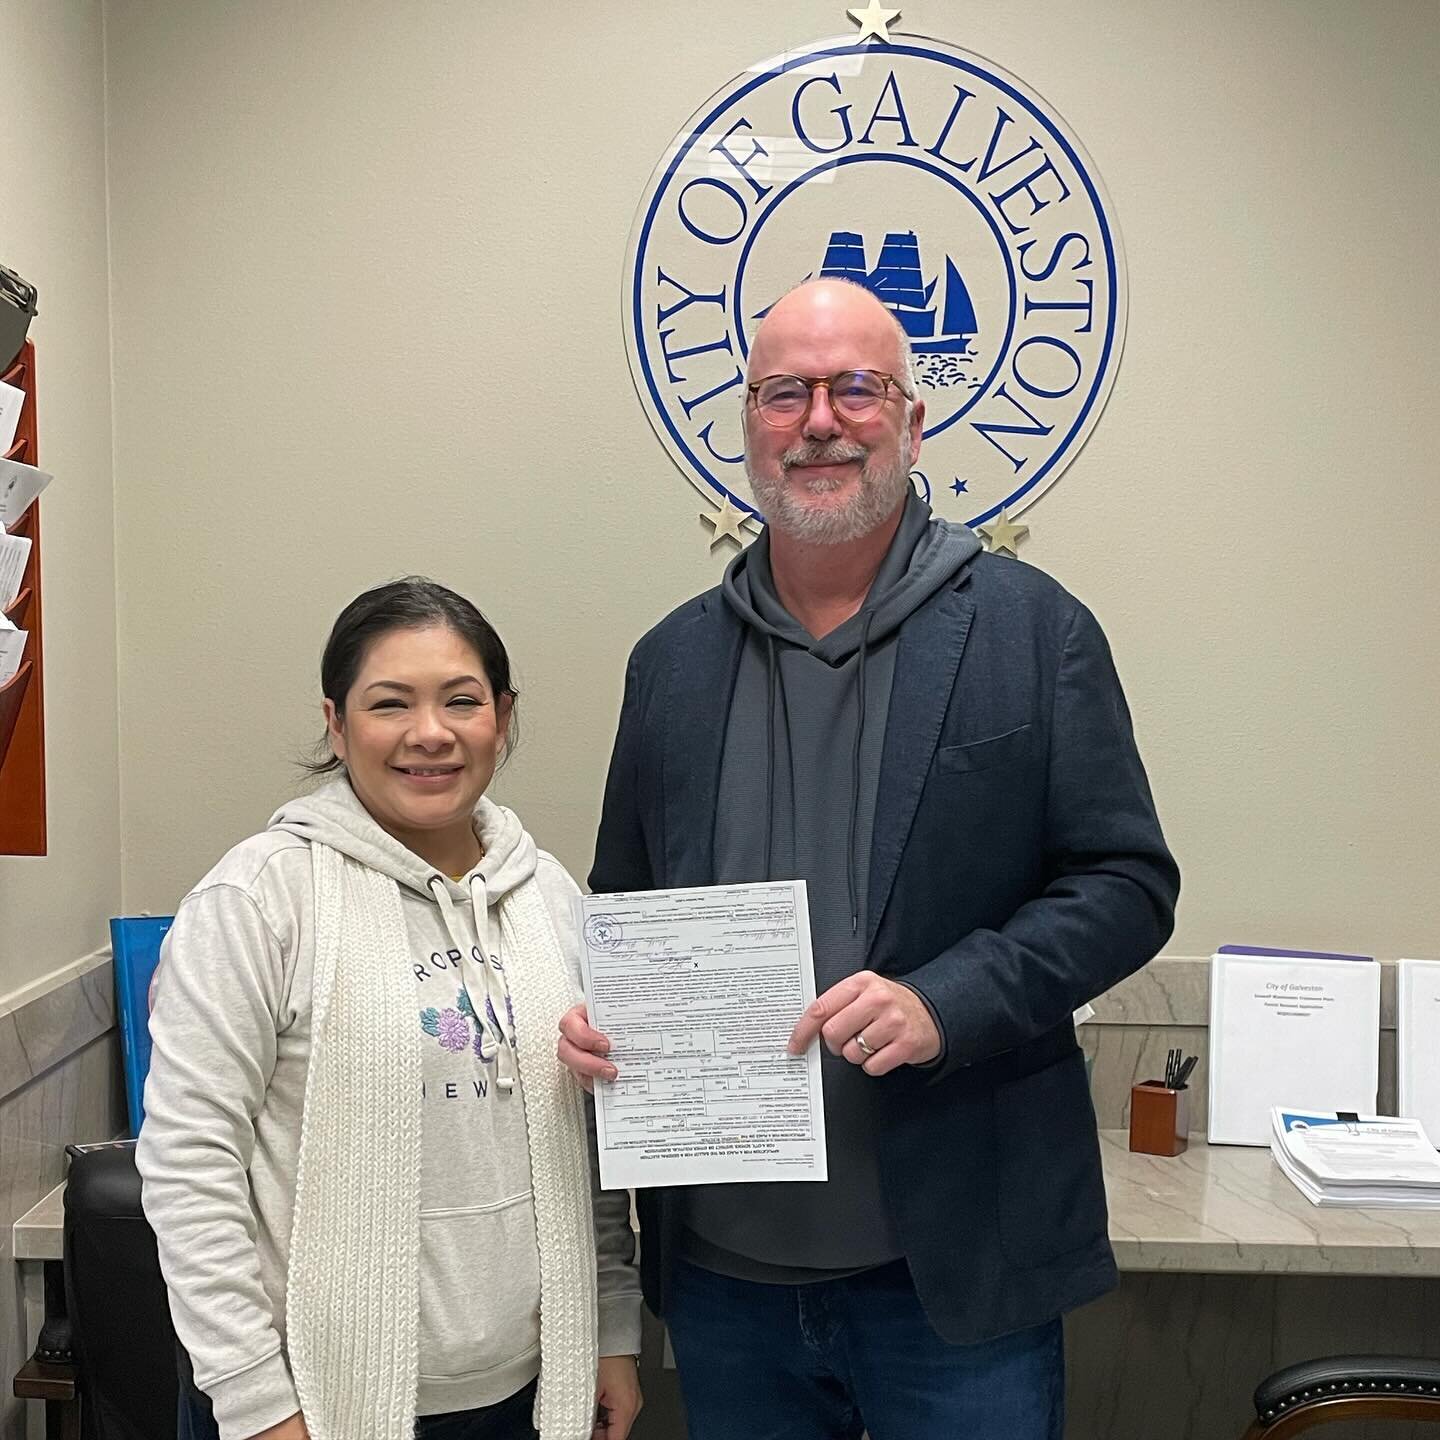 It&rsquo;s official!  I will be on the ballot for re-election as your District 2 Council Member in the beautiful City of Galveston.  Election Day is May 4. #finkleaforgalveston #galvestonvotes #finkleafordistrict2